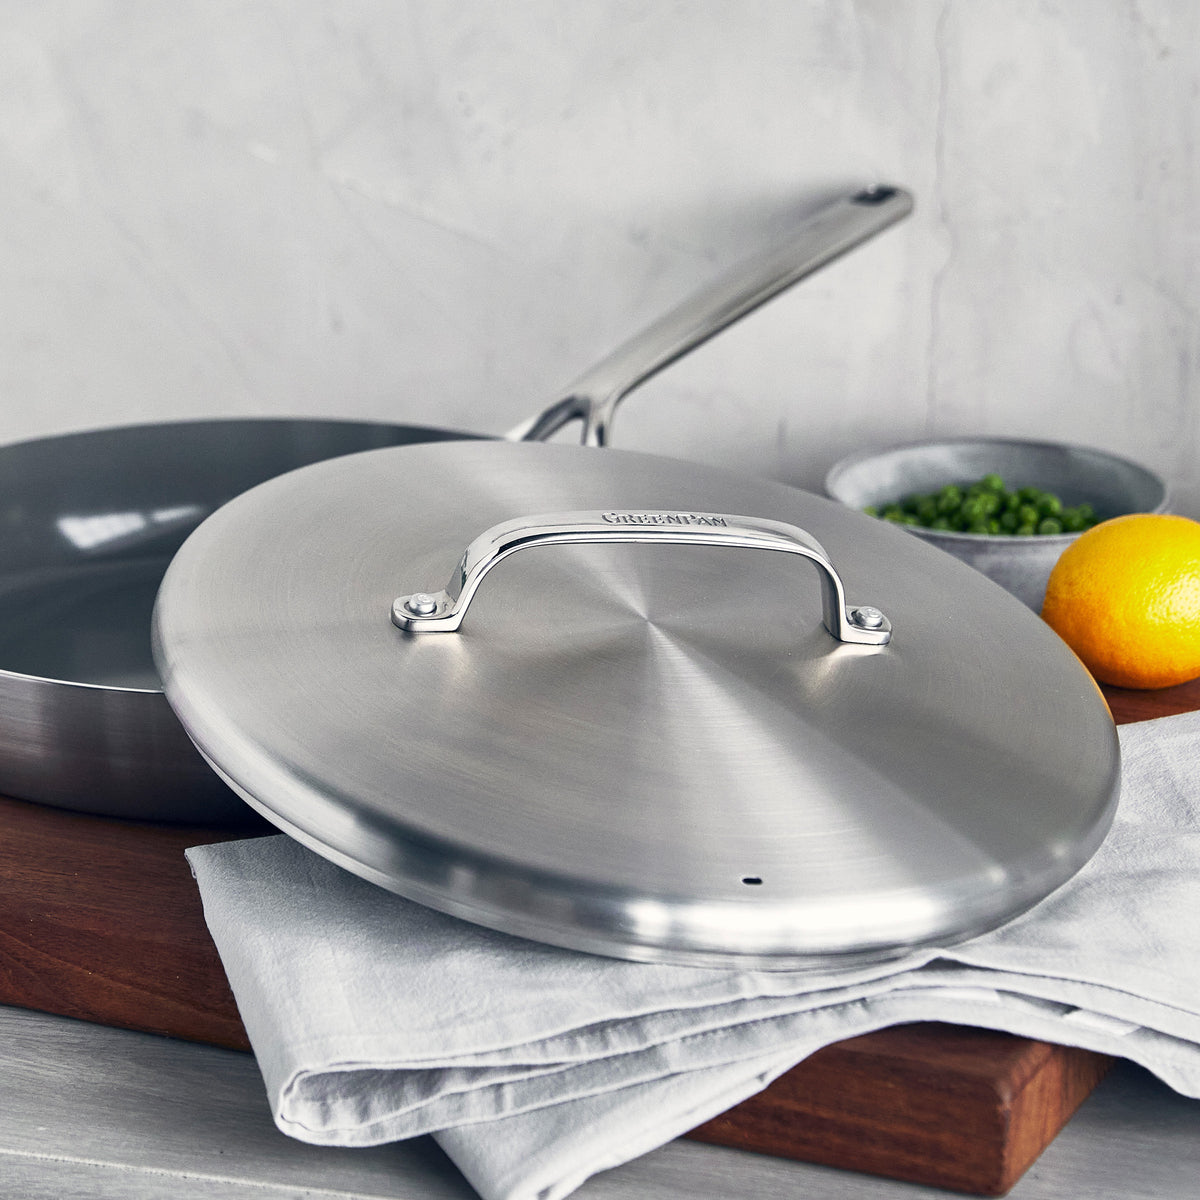 All-Clad d5 Brushed Stainless Steel 10 Non-Stick Fry Pan +